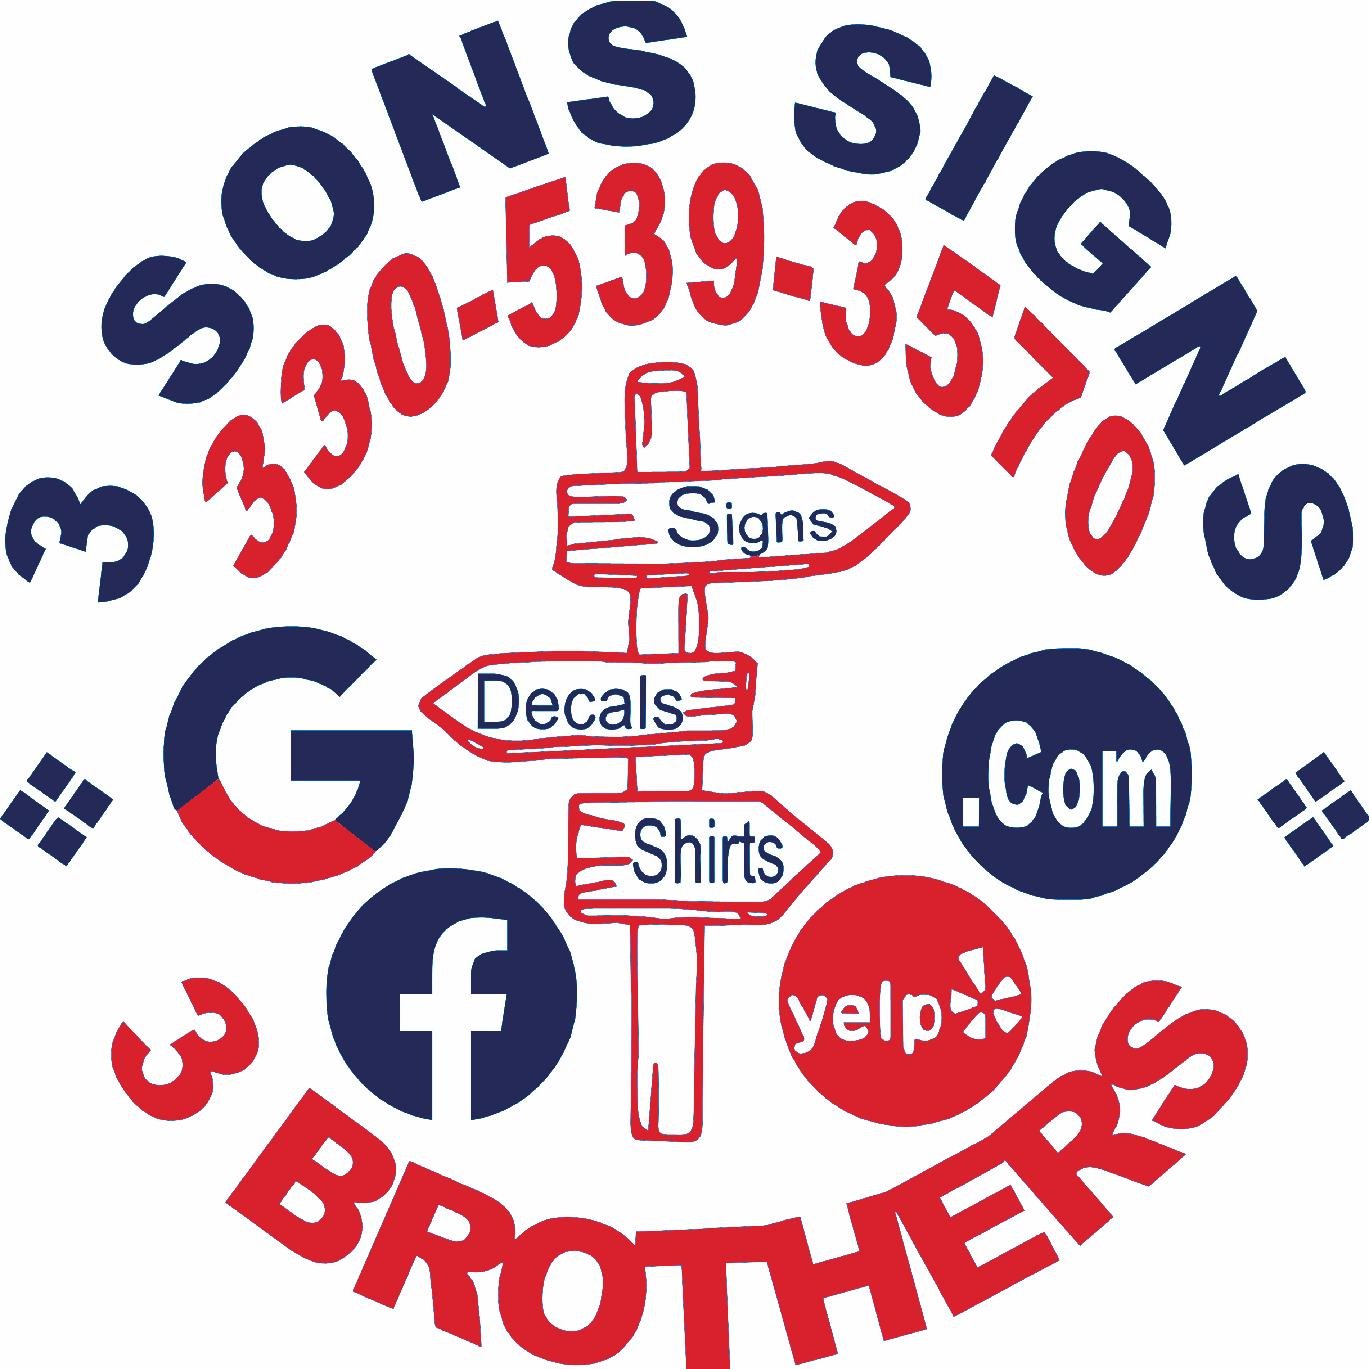 3 Sons Signs